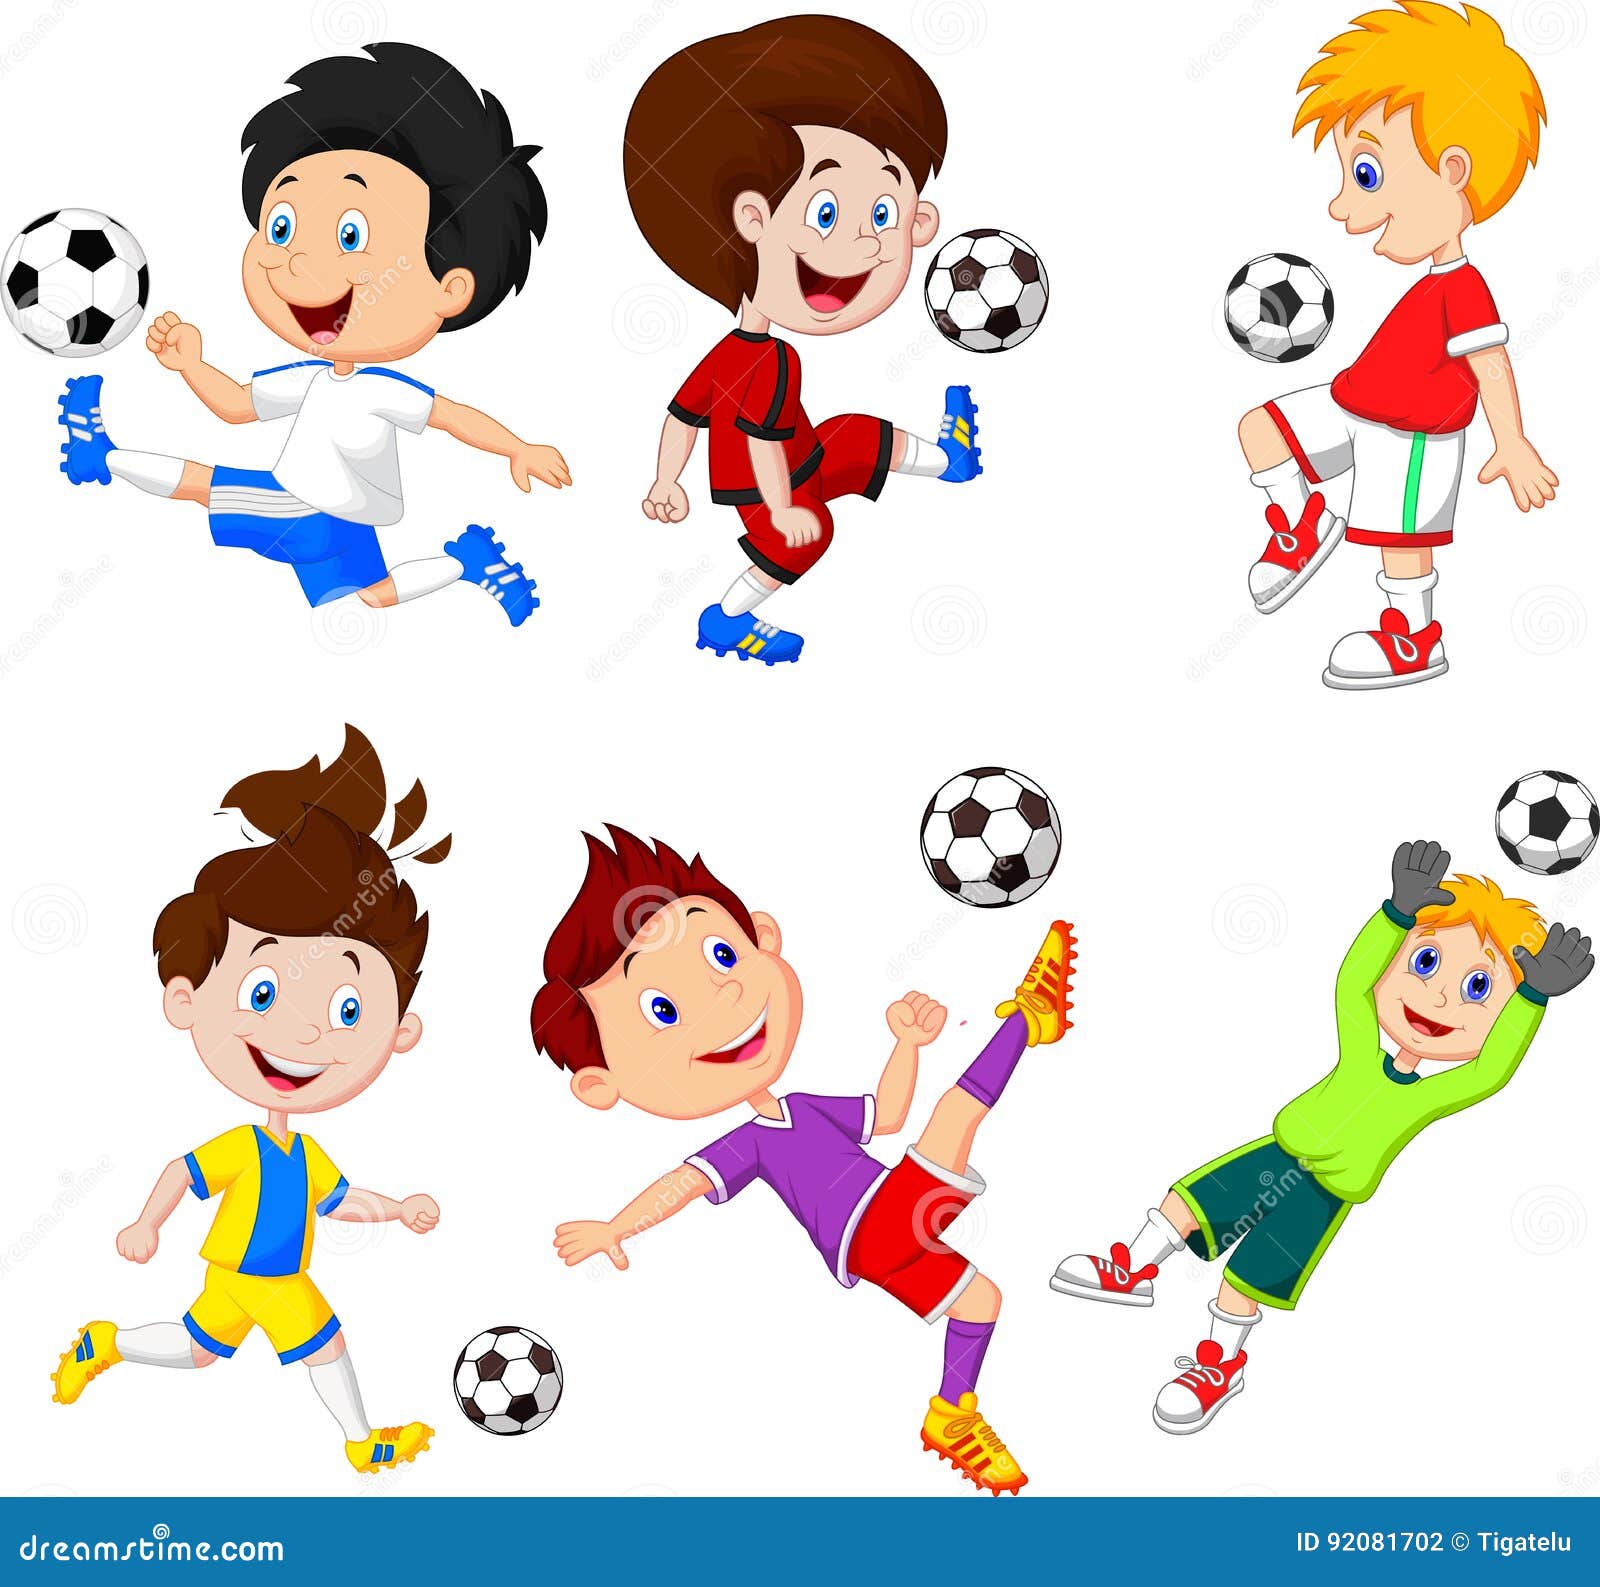 Cartoon Little Boy Playing Football Stock Vector - Illustration of healthy,  player: 92081702